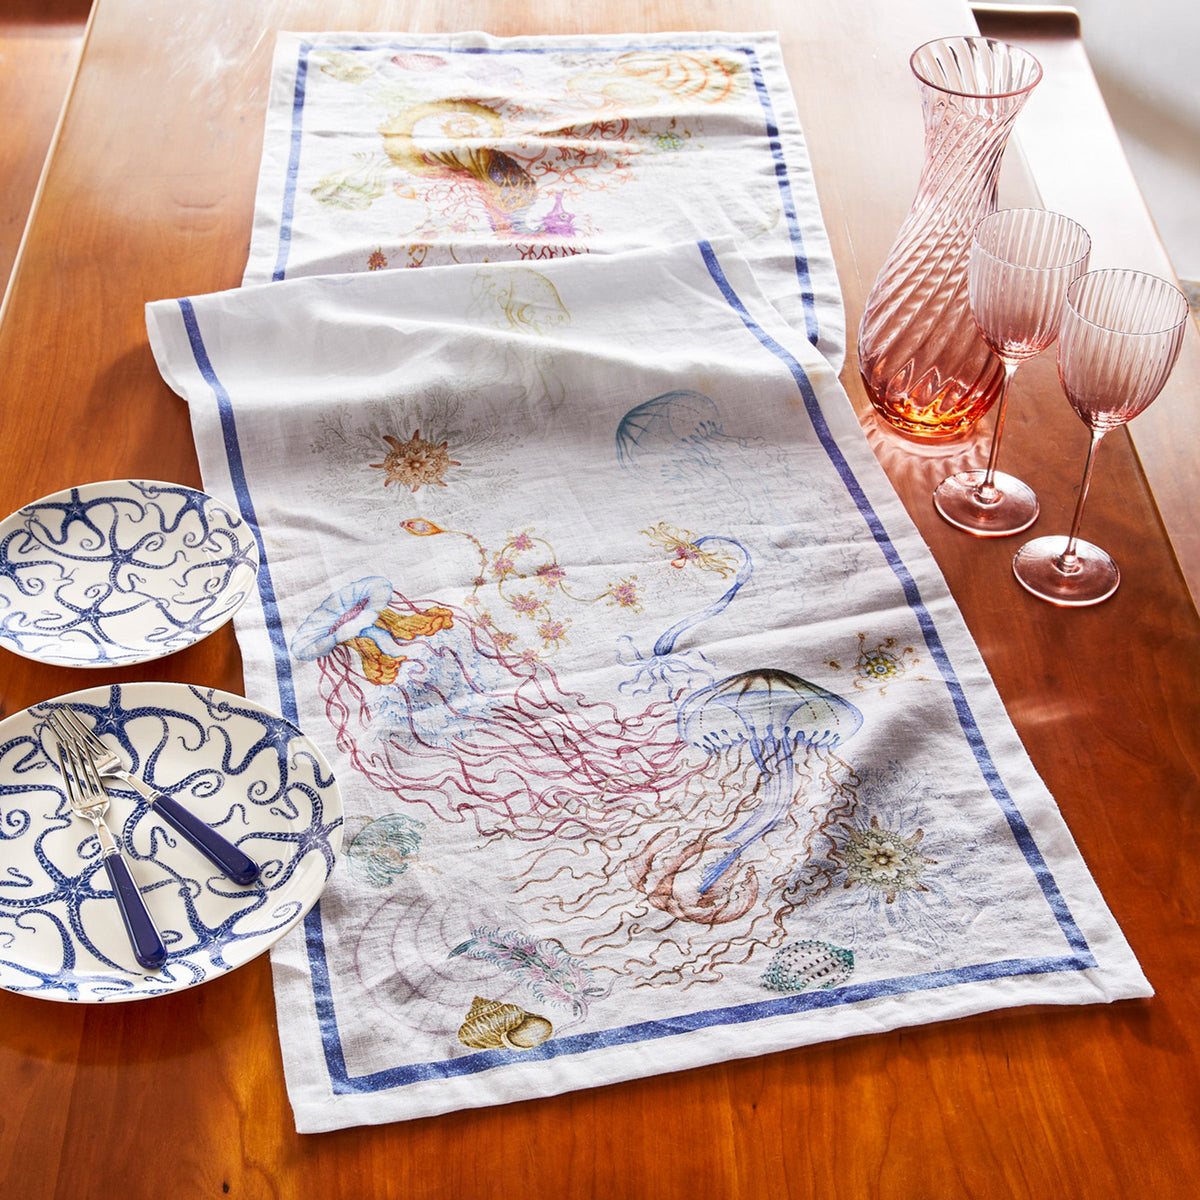 Reef Table Runner with Jellyfish and Seahorses in watercolors on Italian linen from Caskata